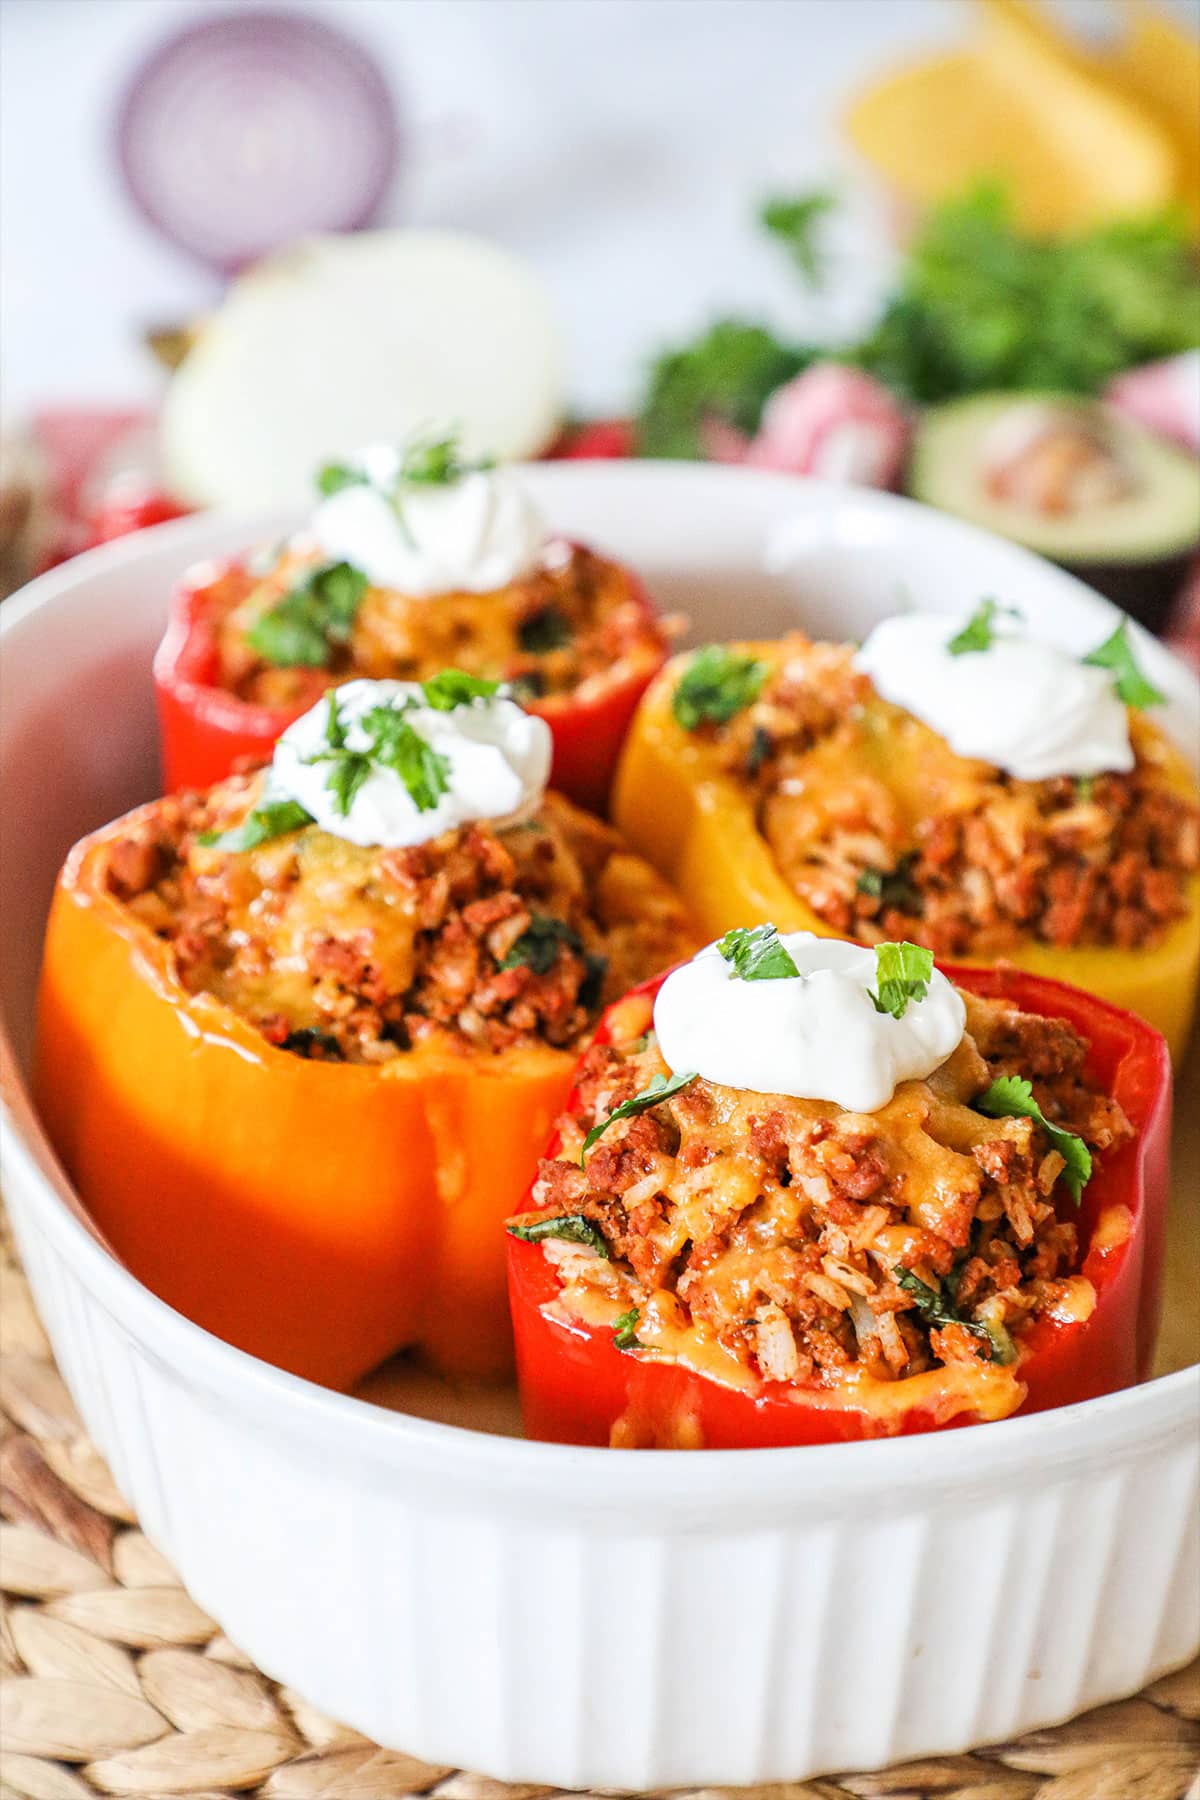 chili stuffed bell peppers with a dollop of sour cream